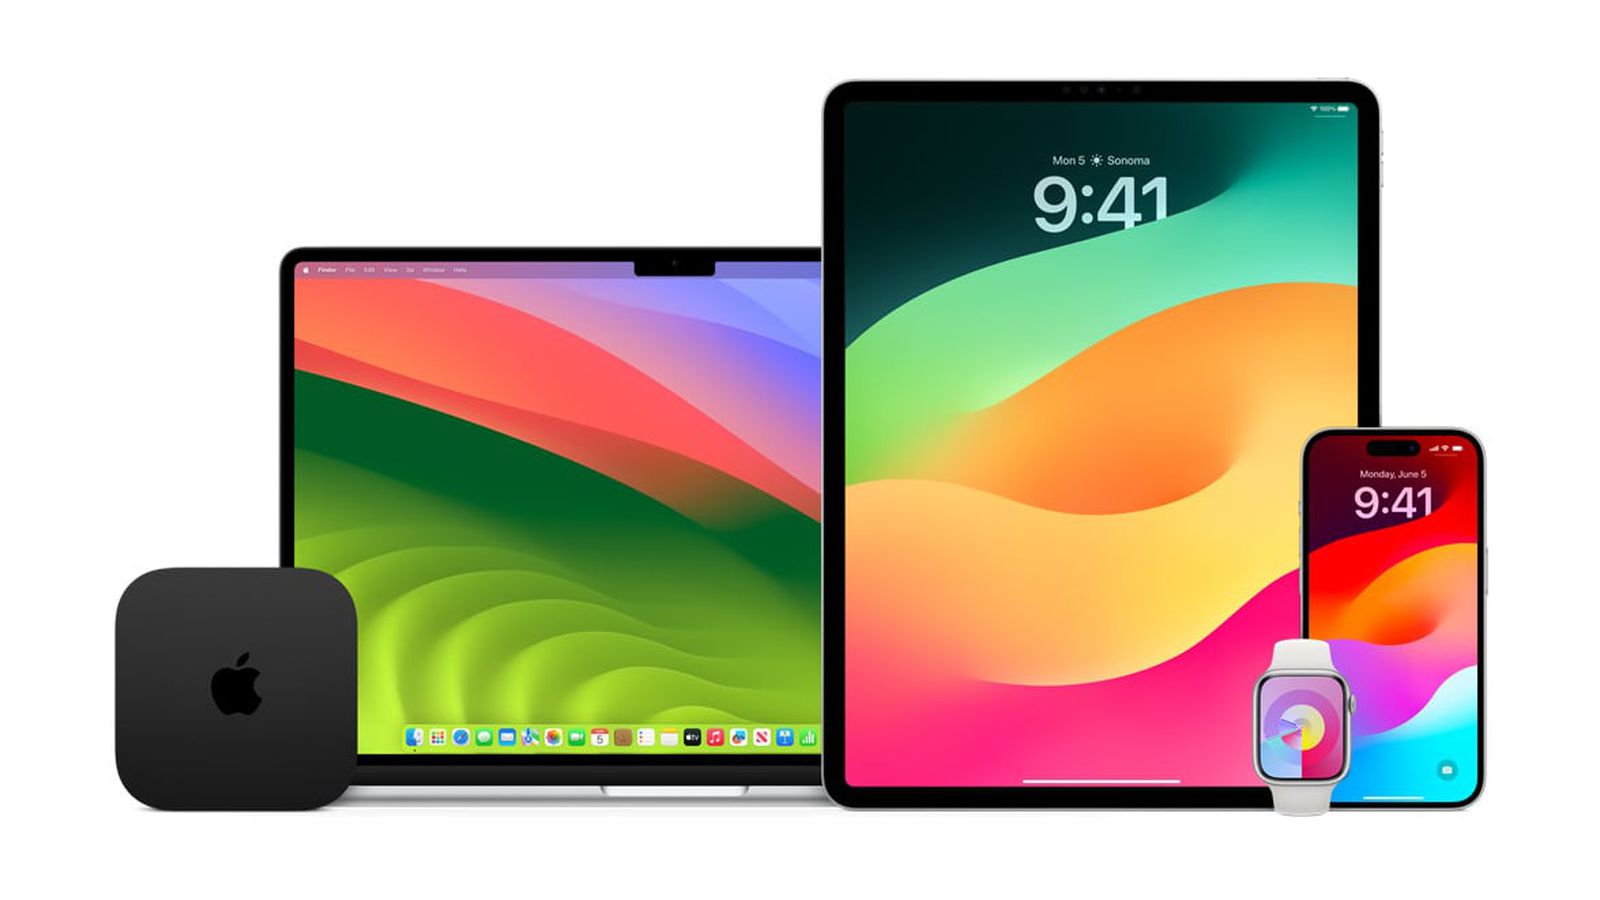 Apple Product Roadmap 202324 Over 15 New Devices in Development